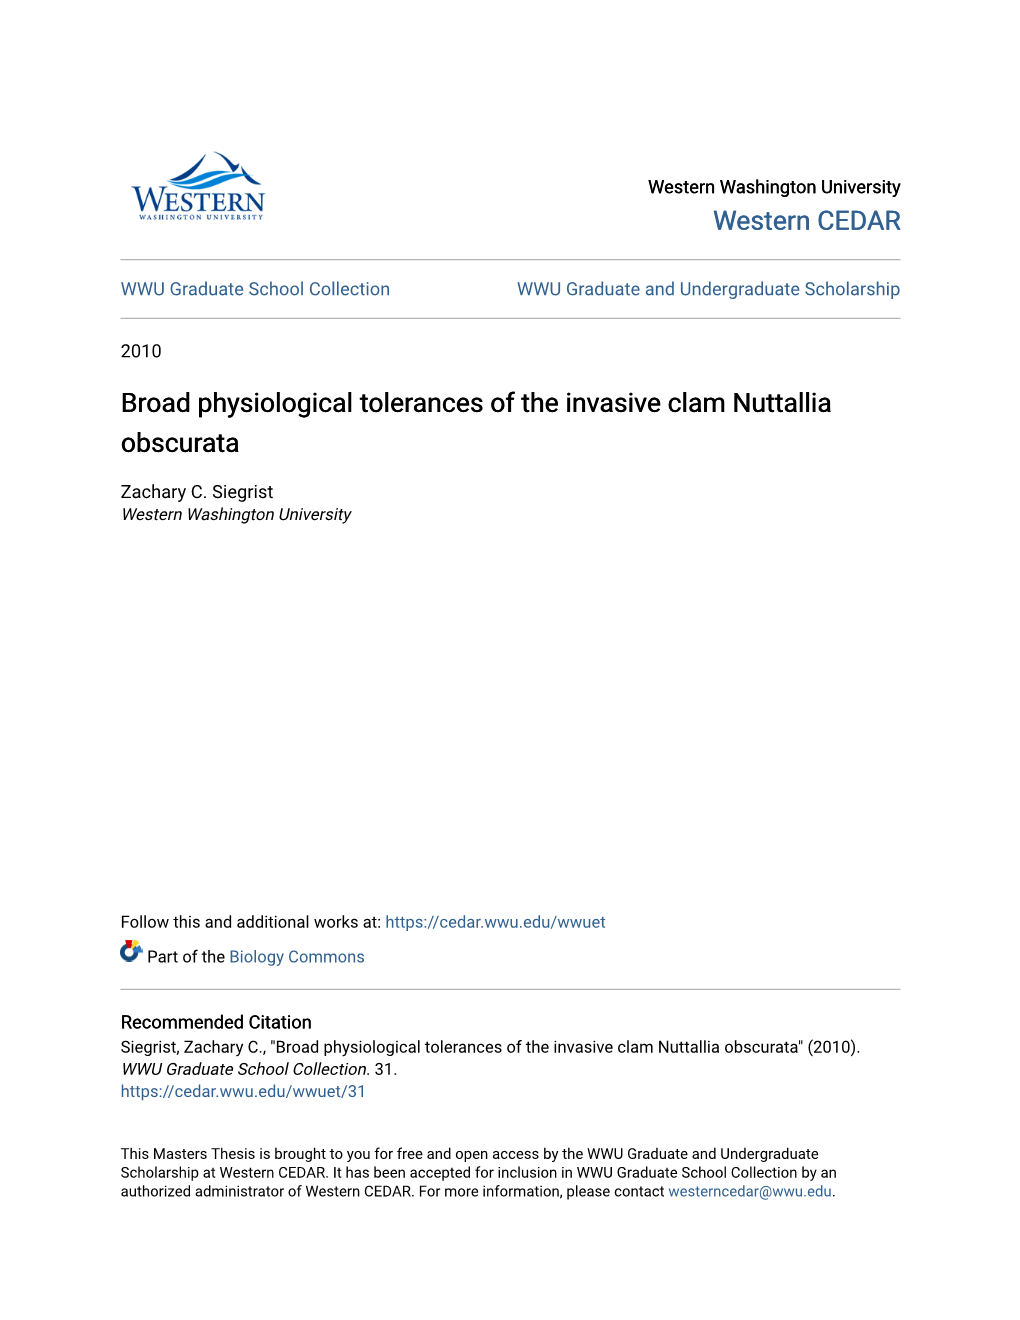 Broad Physiological Tolerances of the Invasive Clam Nuttallia Obscurata